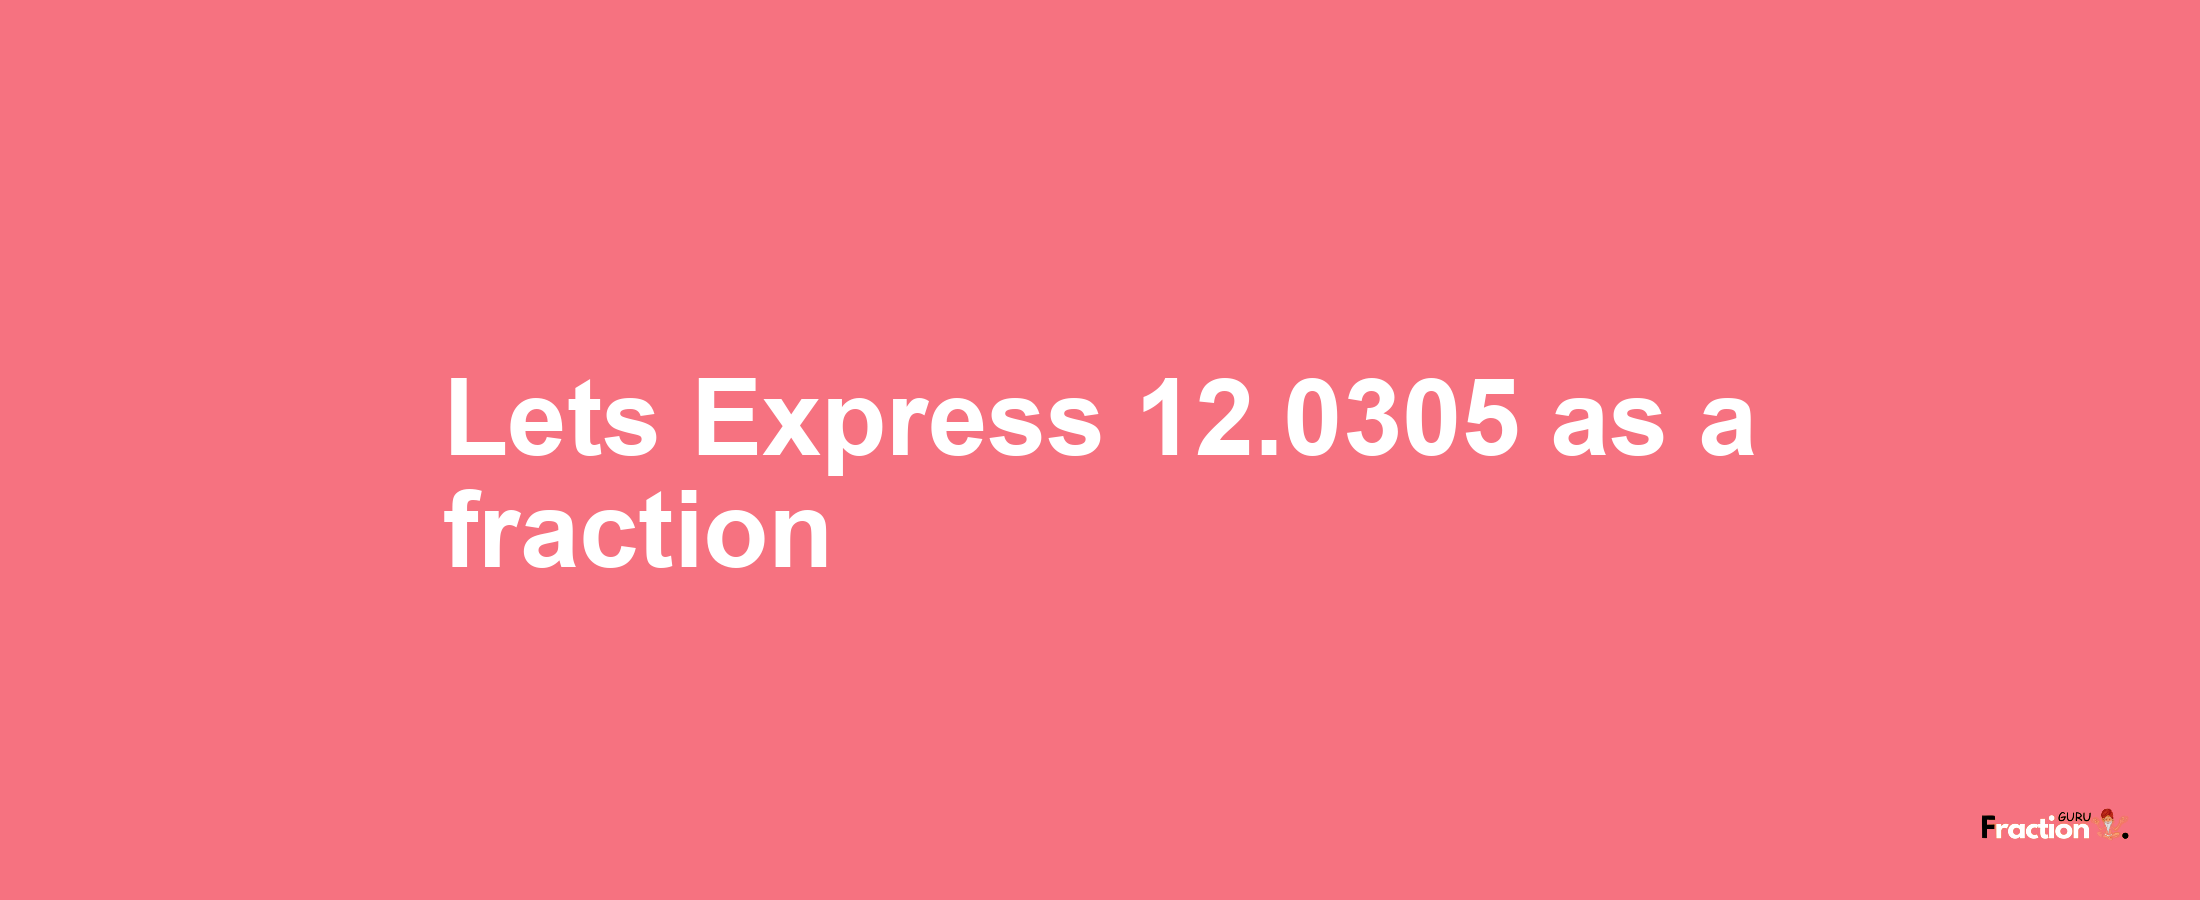 Lets Express 12.0305 as afraction